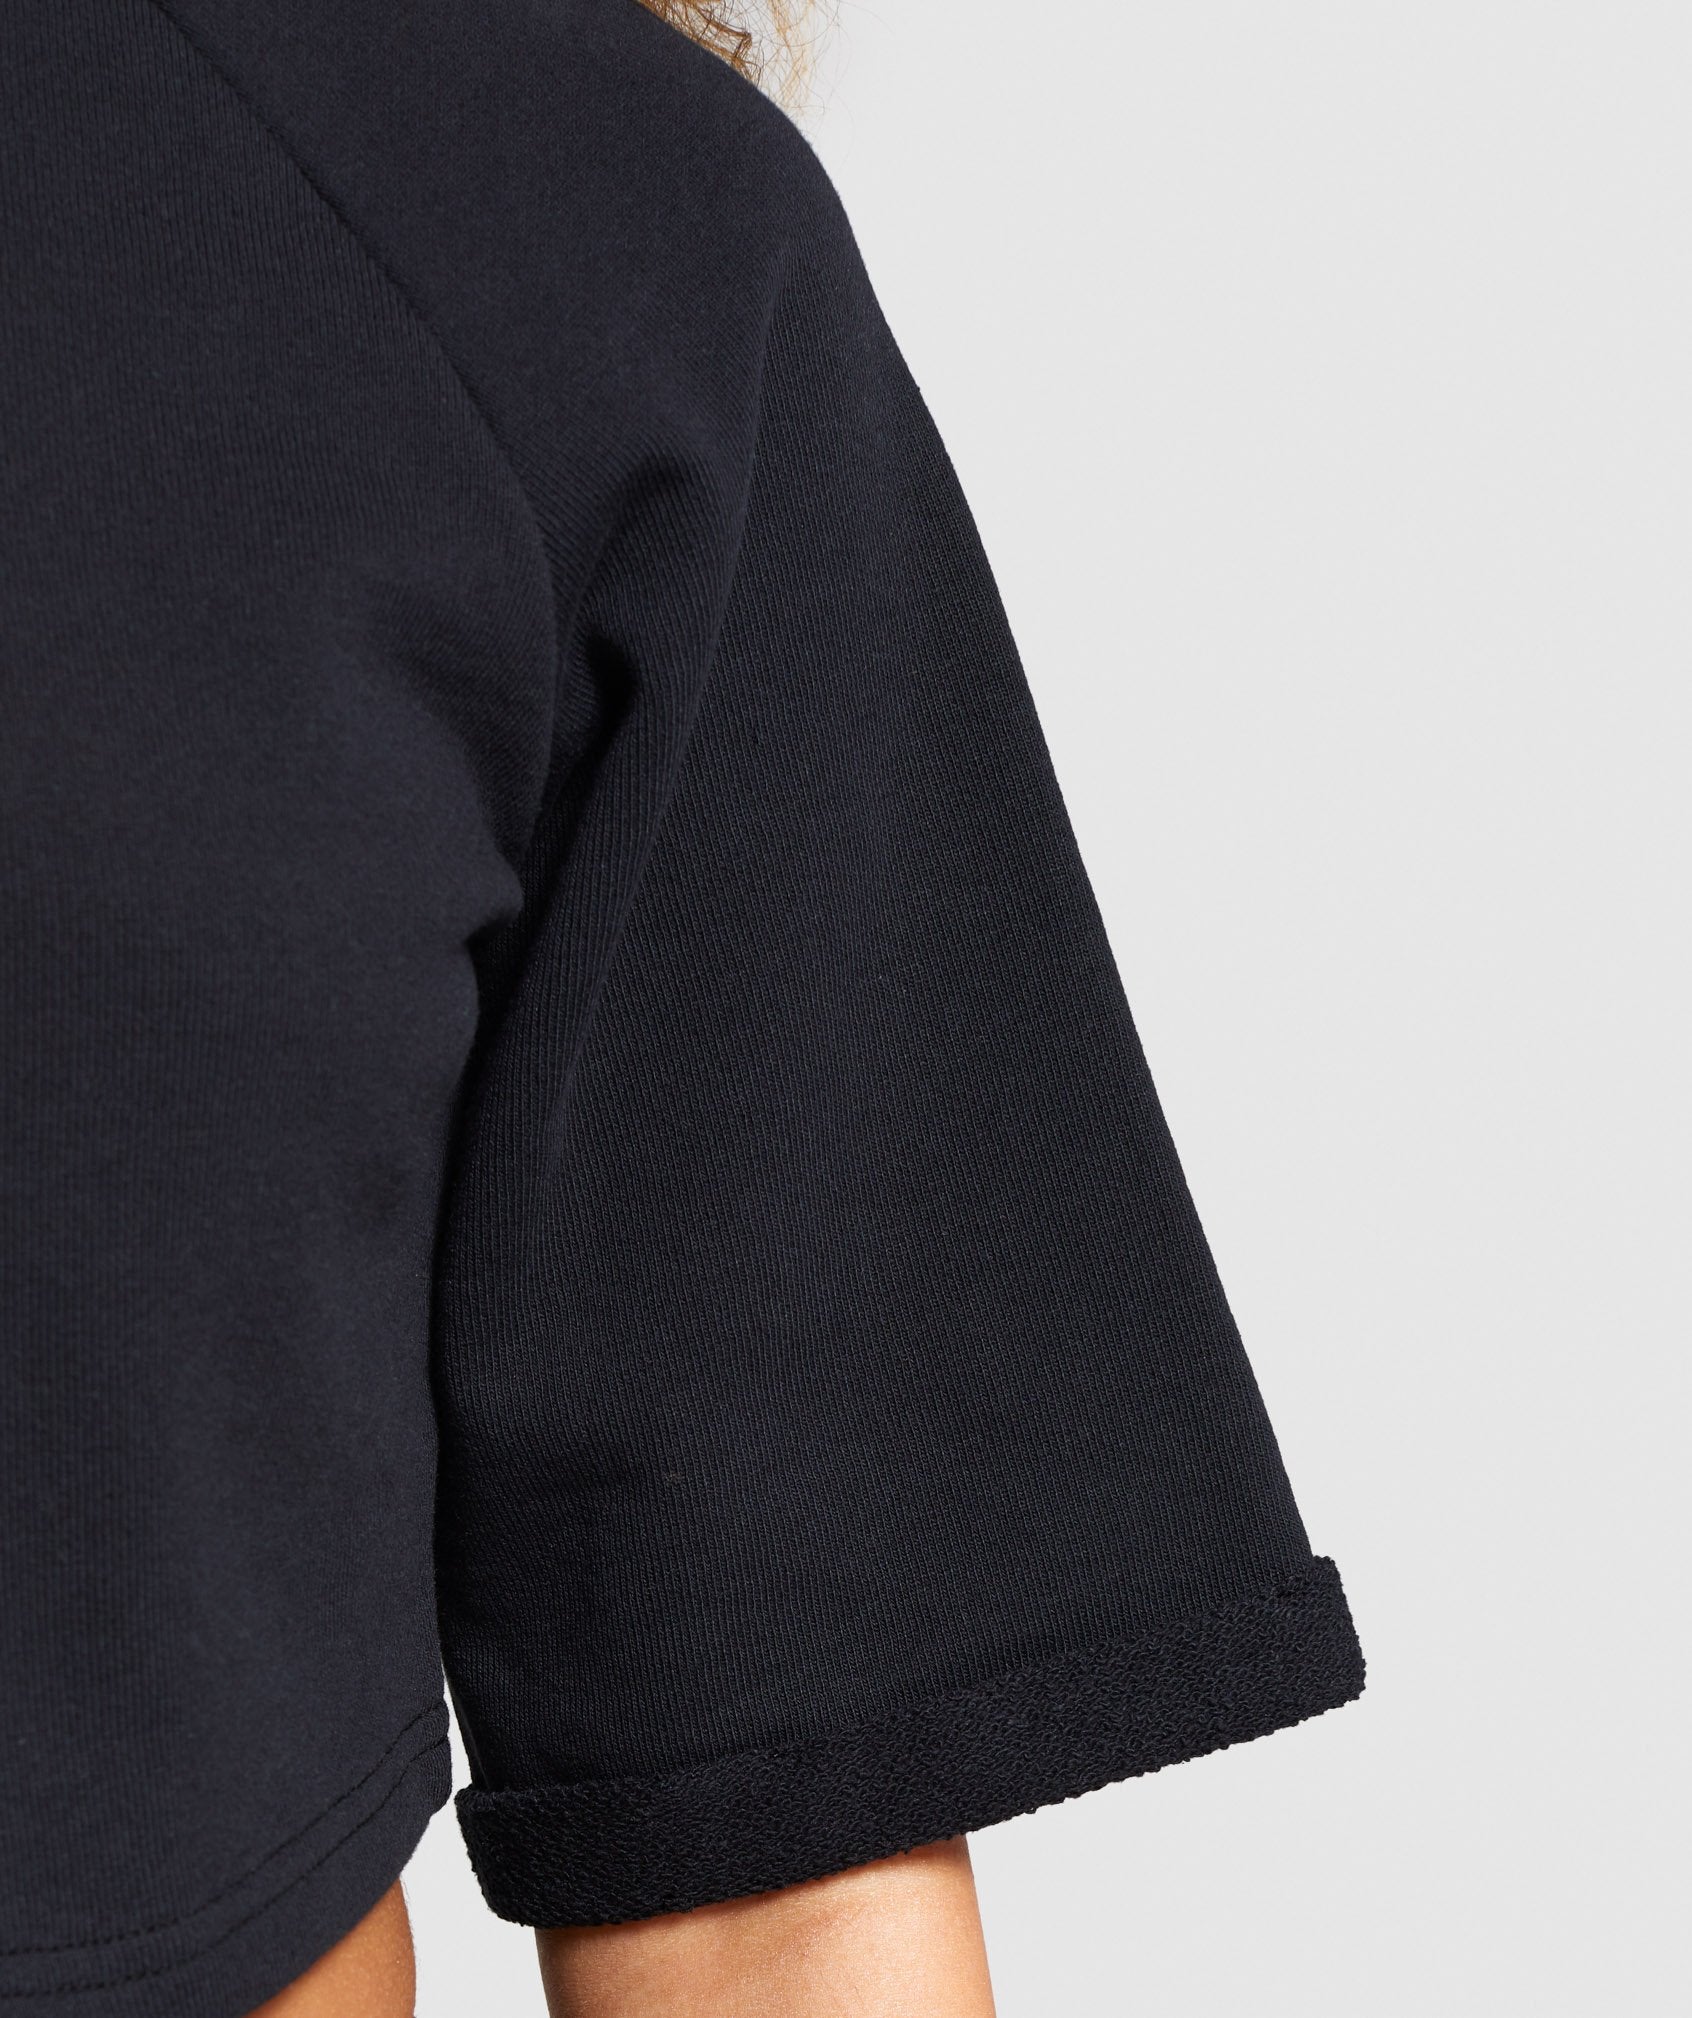 The Visionaries Boxy Cropped Sweater in Black - view 5